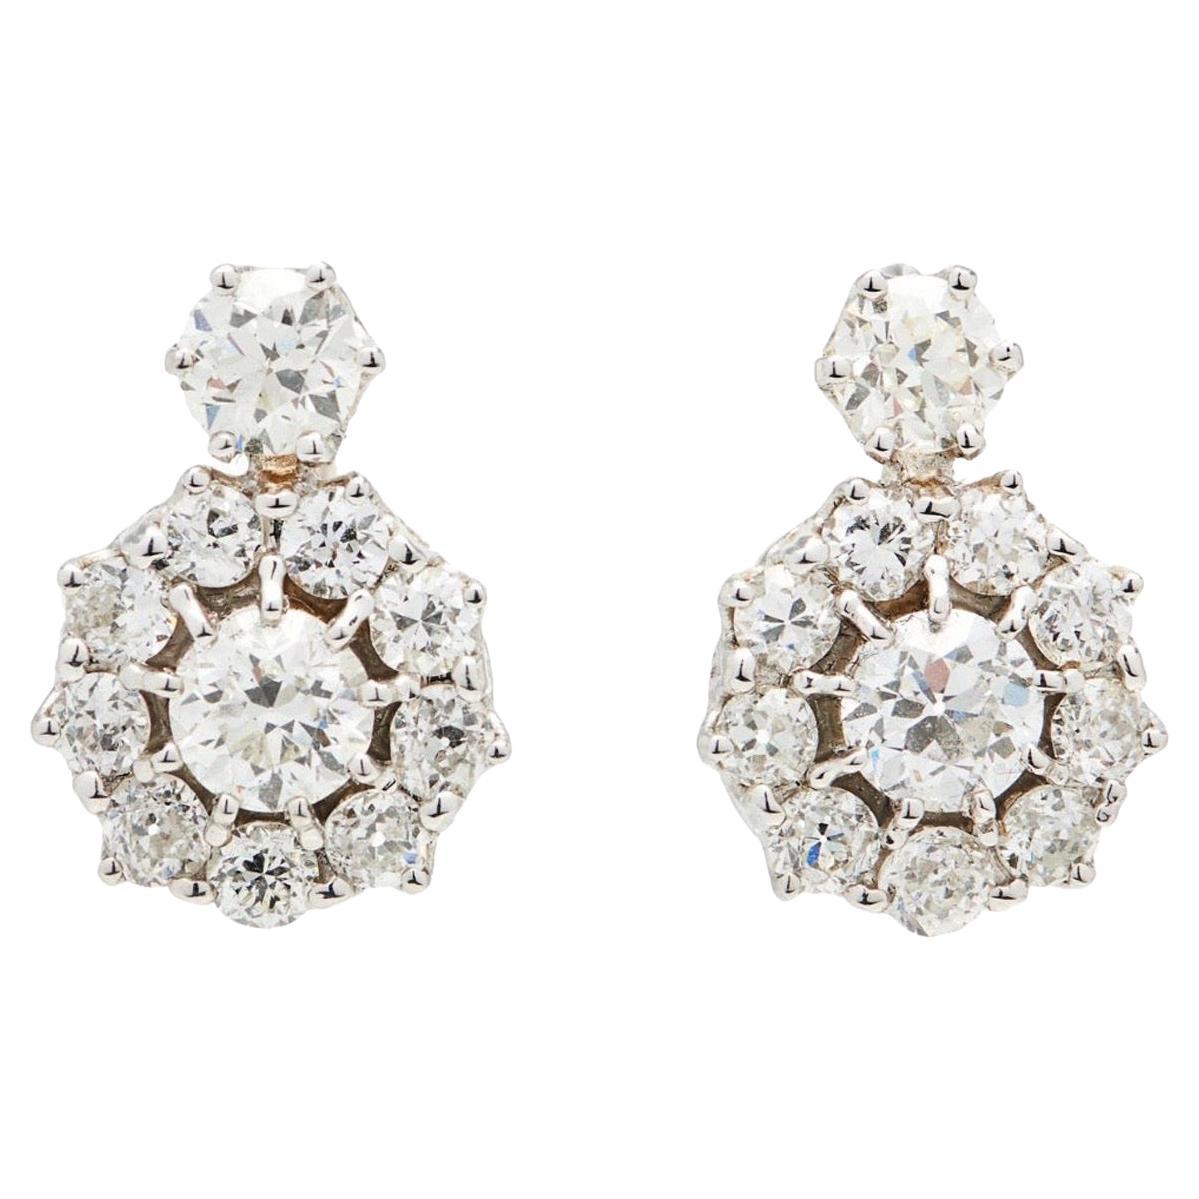 Our best selling earring! 
Classic, dazzling & never go out of style.
Old mine diamonds set in a cluster custom 18k gold mounting. 
2 larger center diamonds are approx 1.65 CTW VS2-SI. 
with an additional 4.25 carat old mine diamonds